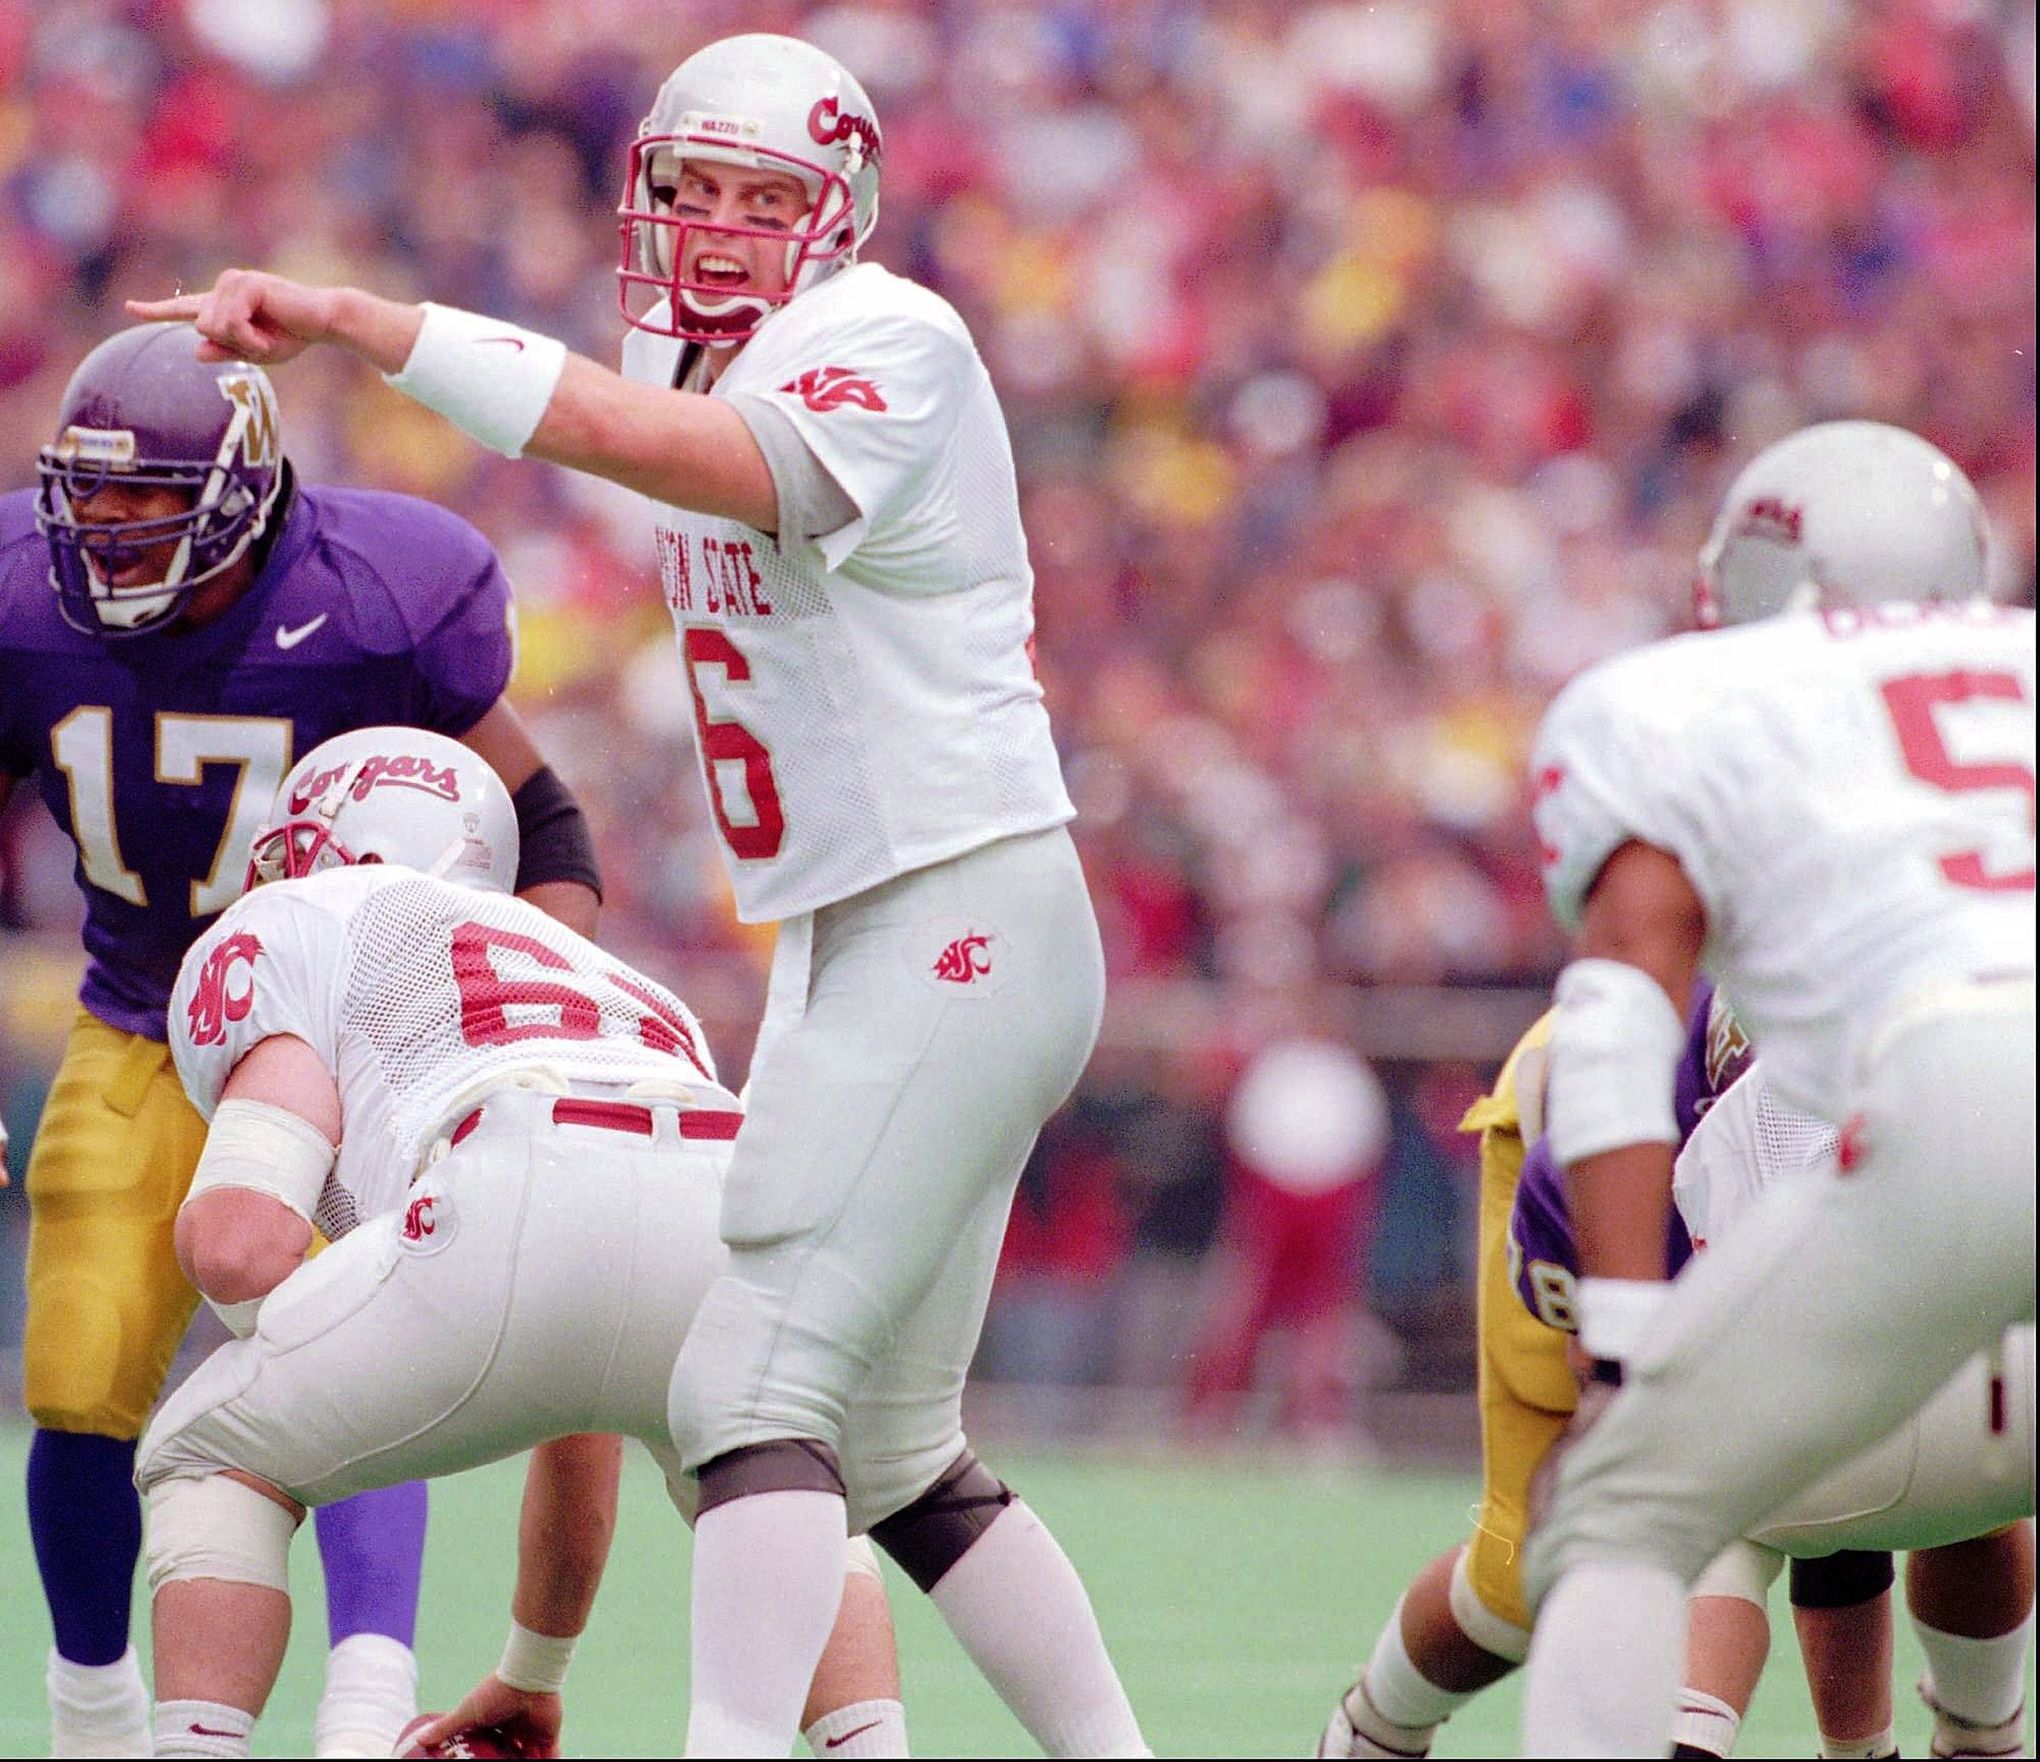 Ryan Leaf: Out of tragedy came unity, then triumph for WSU